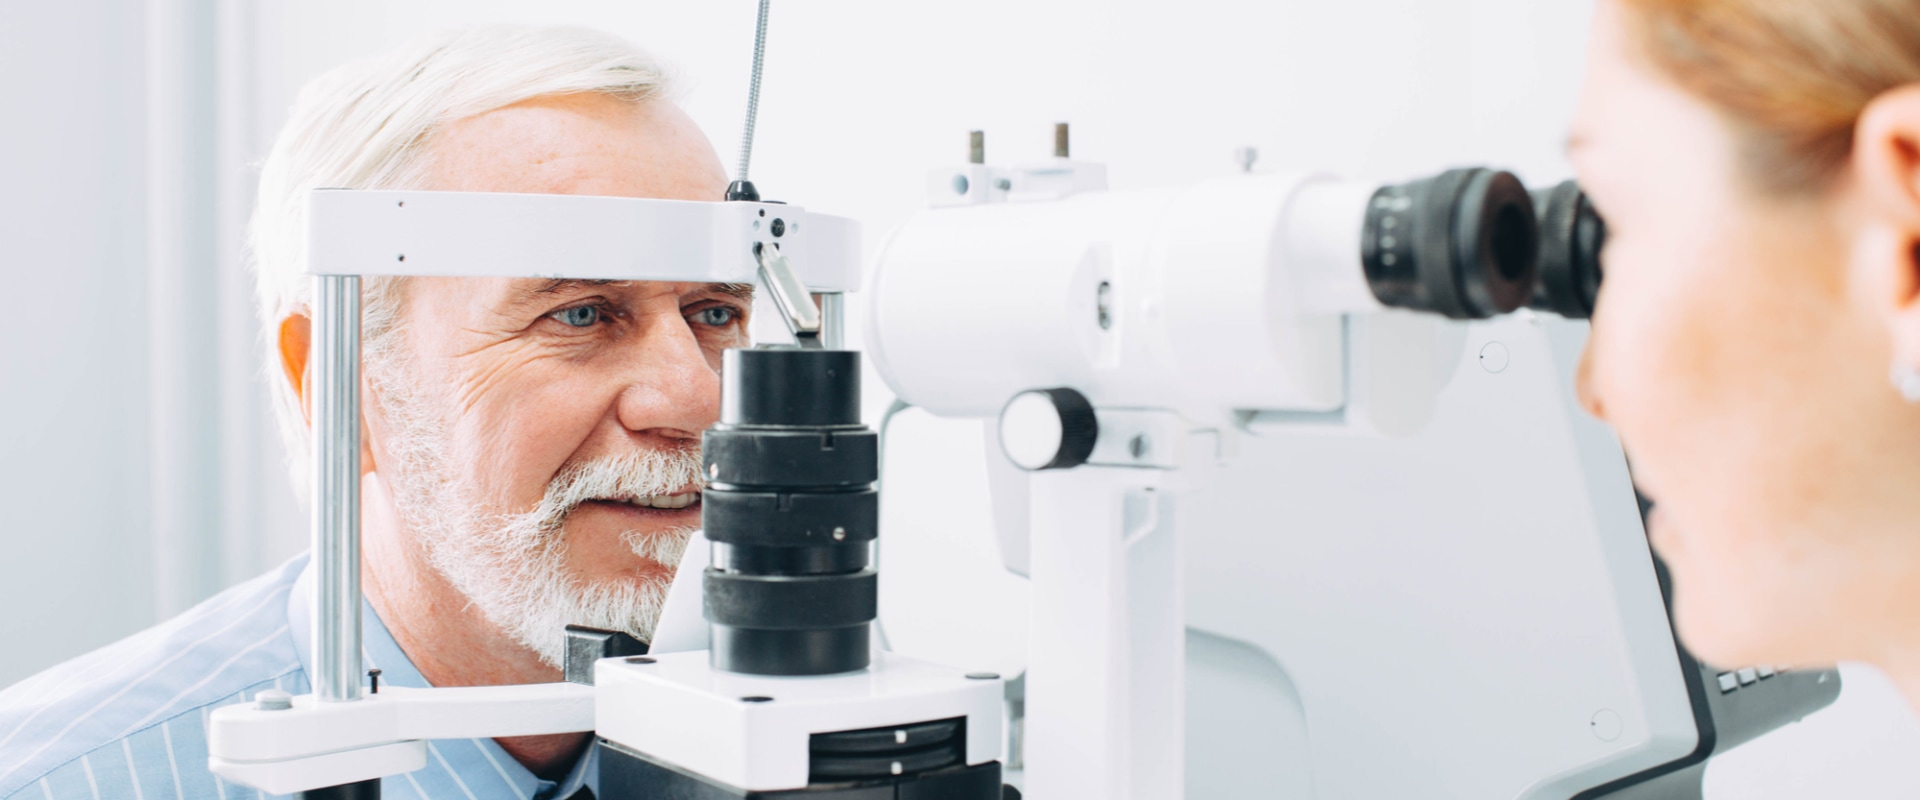 What Health Risks Can Be Detected During an Eye Exam?